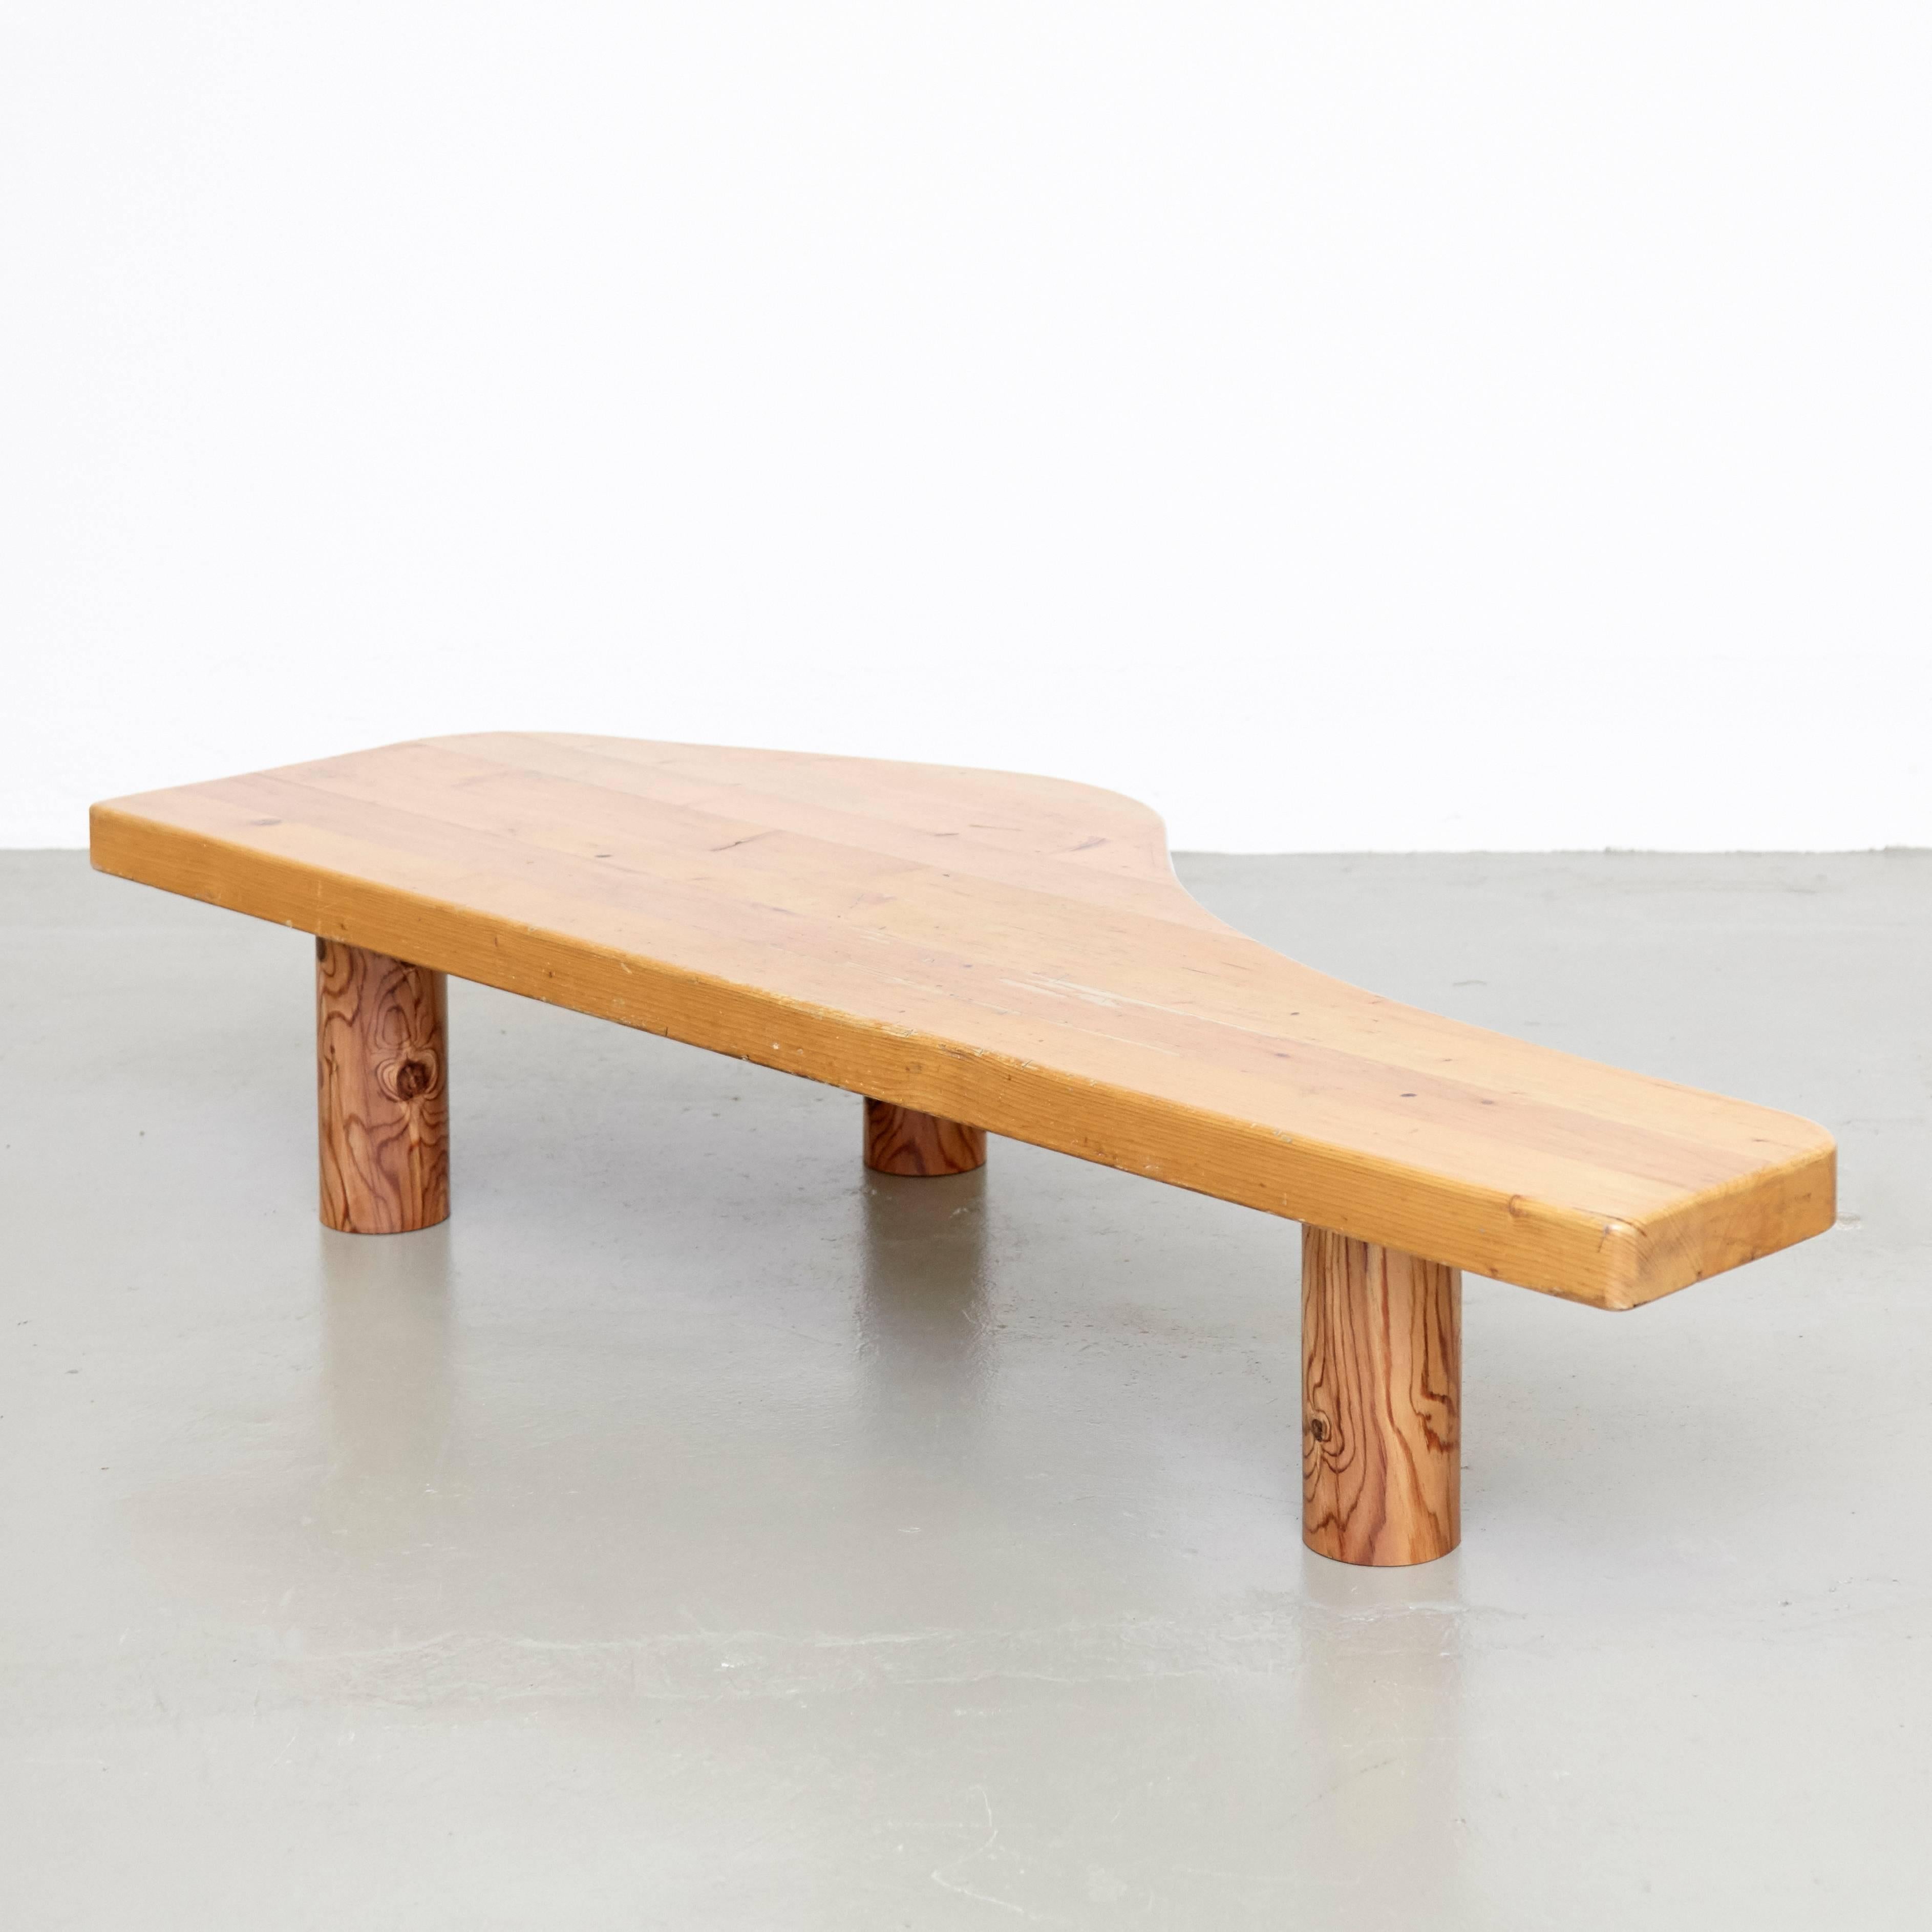 Free-form low table in the style of Charlotte Perriand for Les Arcs ski resort, circa 1970, manufactured in France.
Pinewood.

Probably it was manufactured by the previous owner circa 1970 

In good original condition, with minor wear